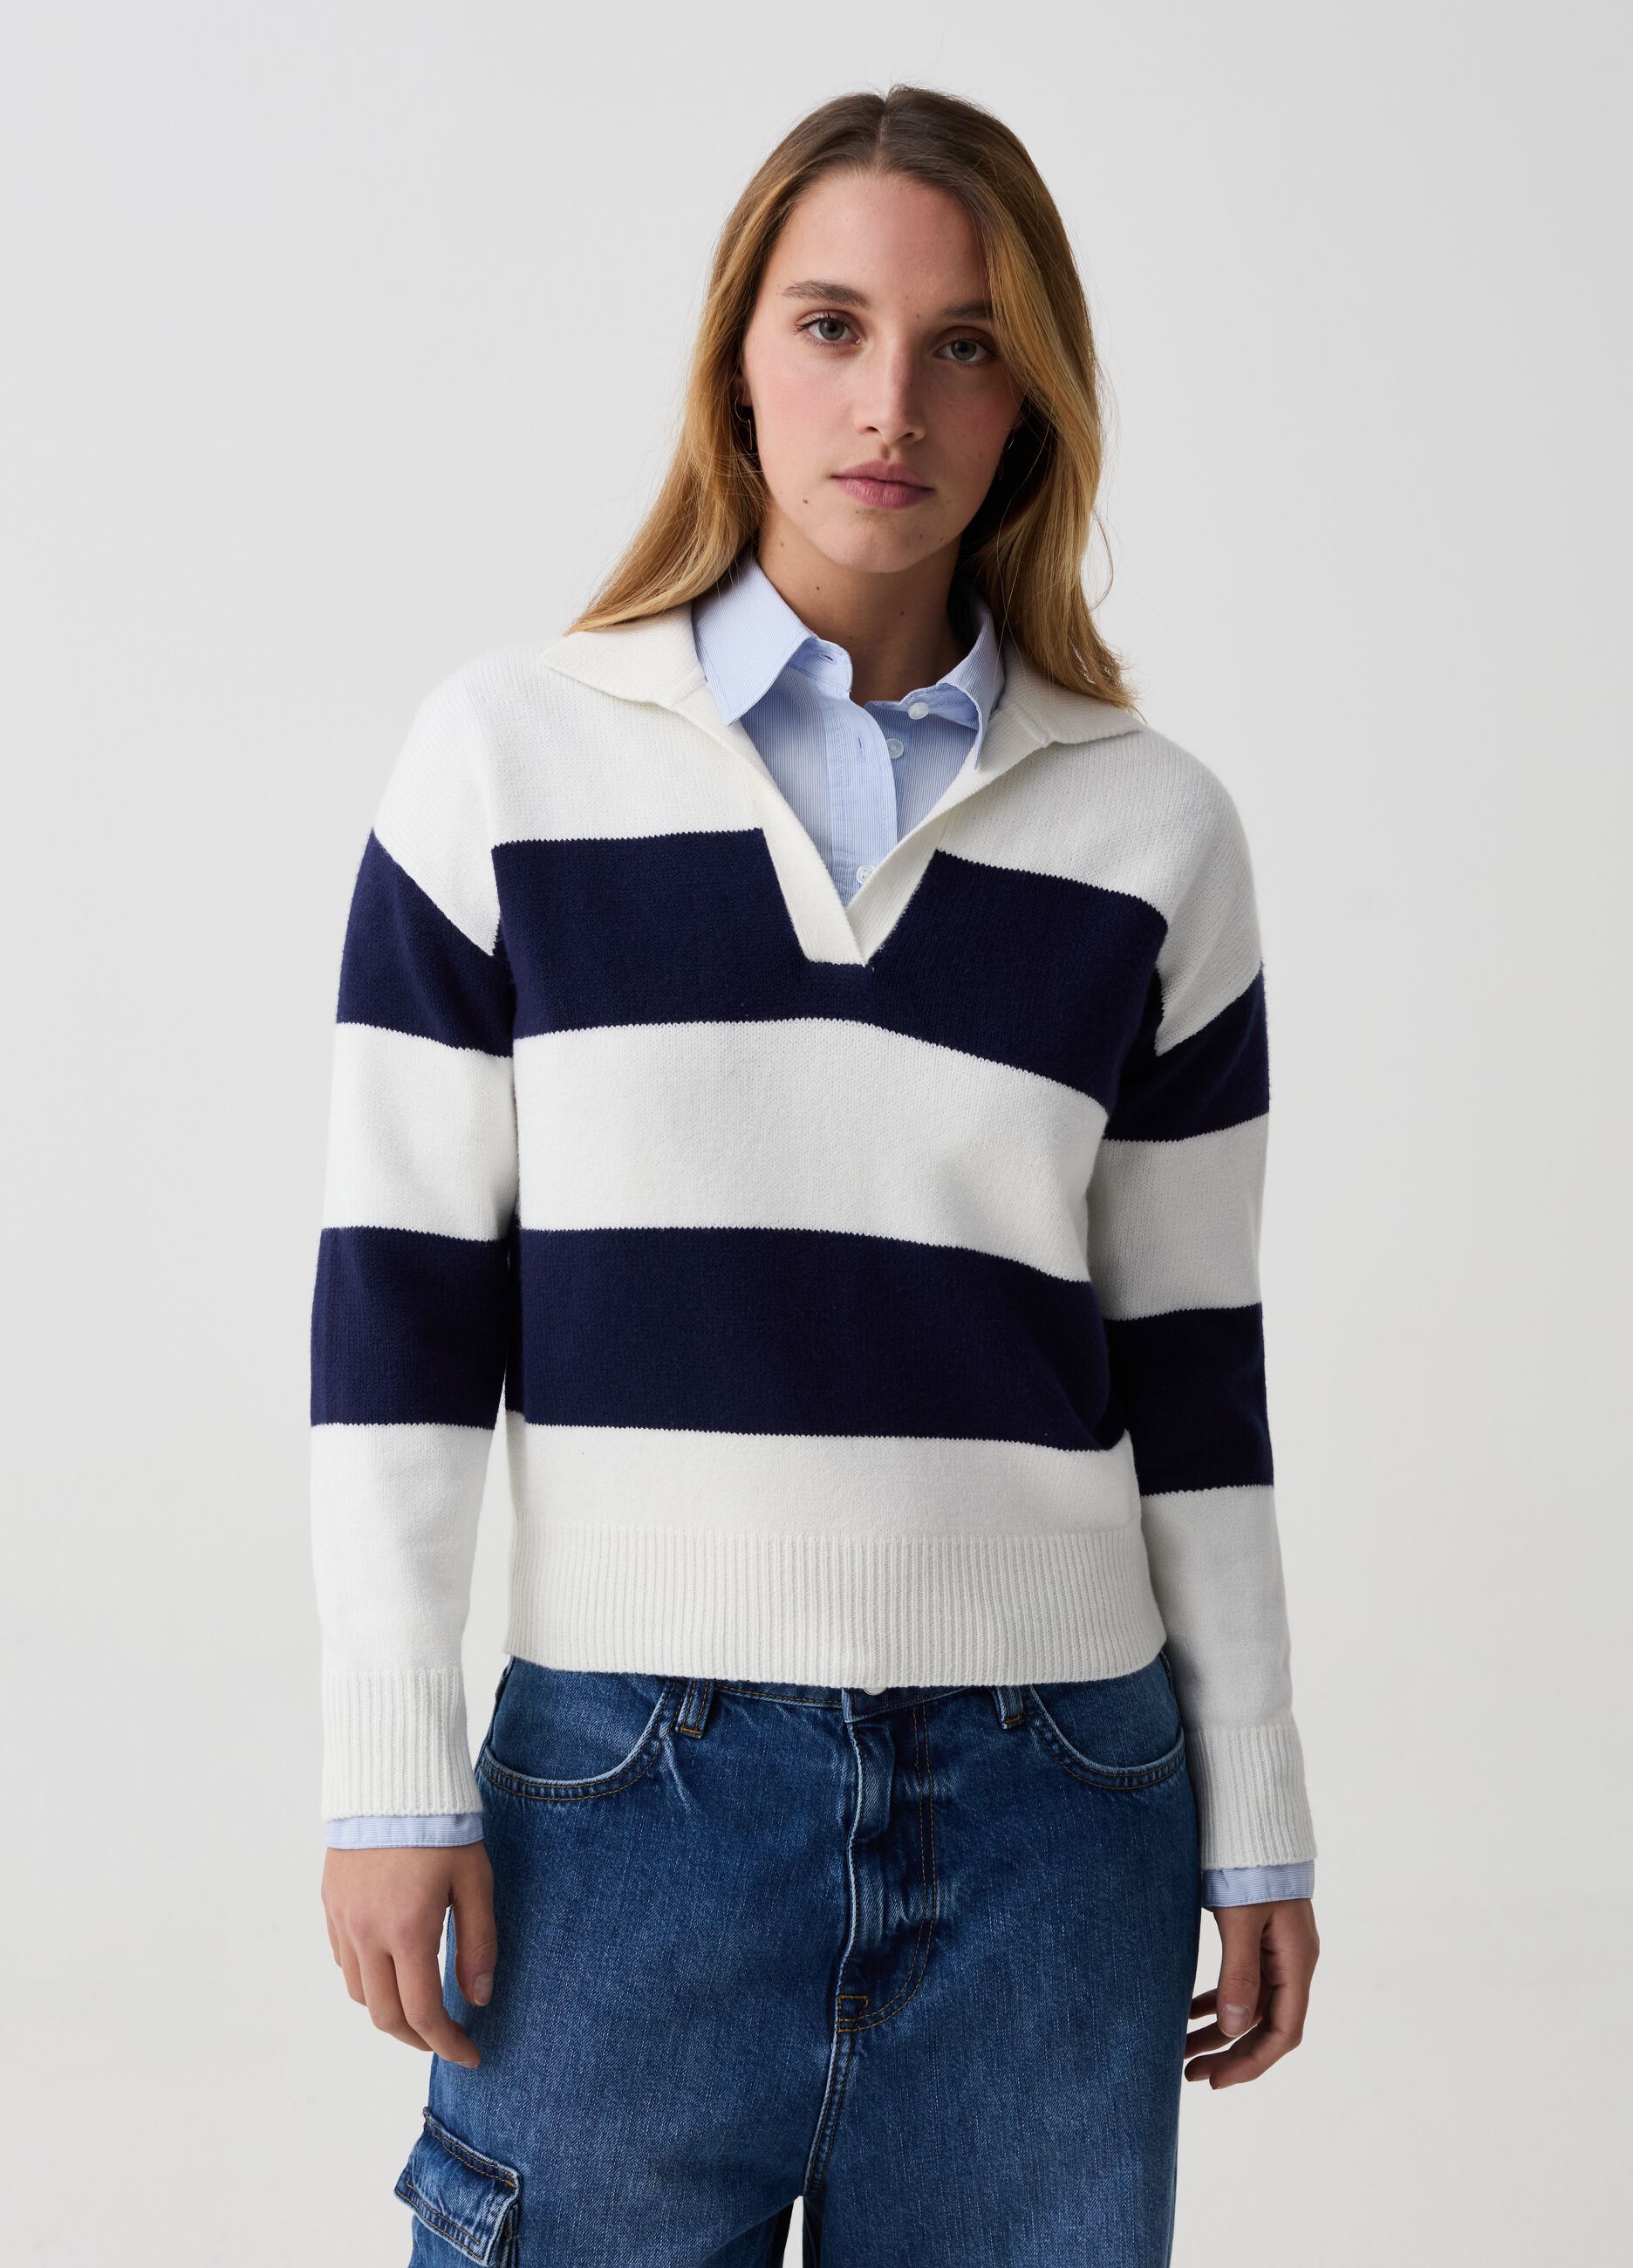 Striped top with polo neck